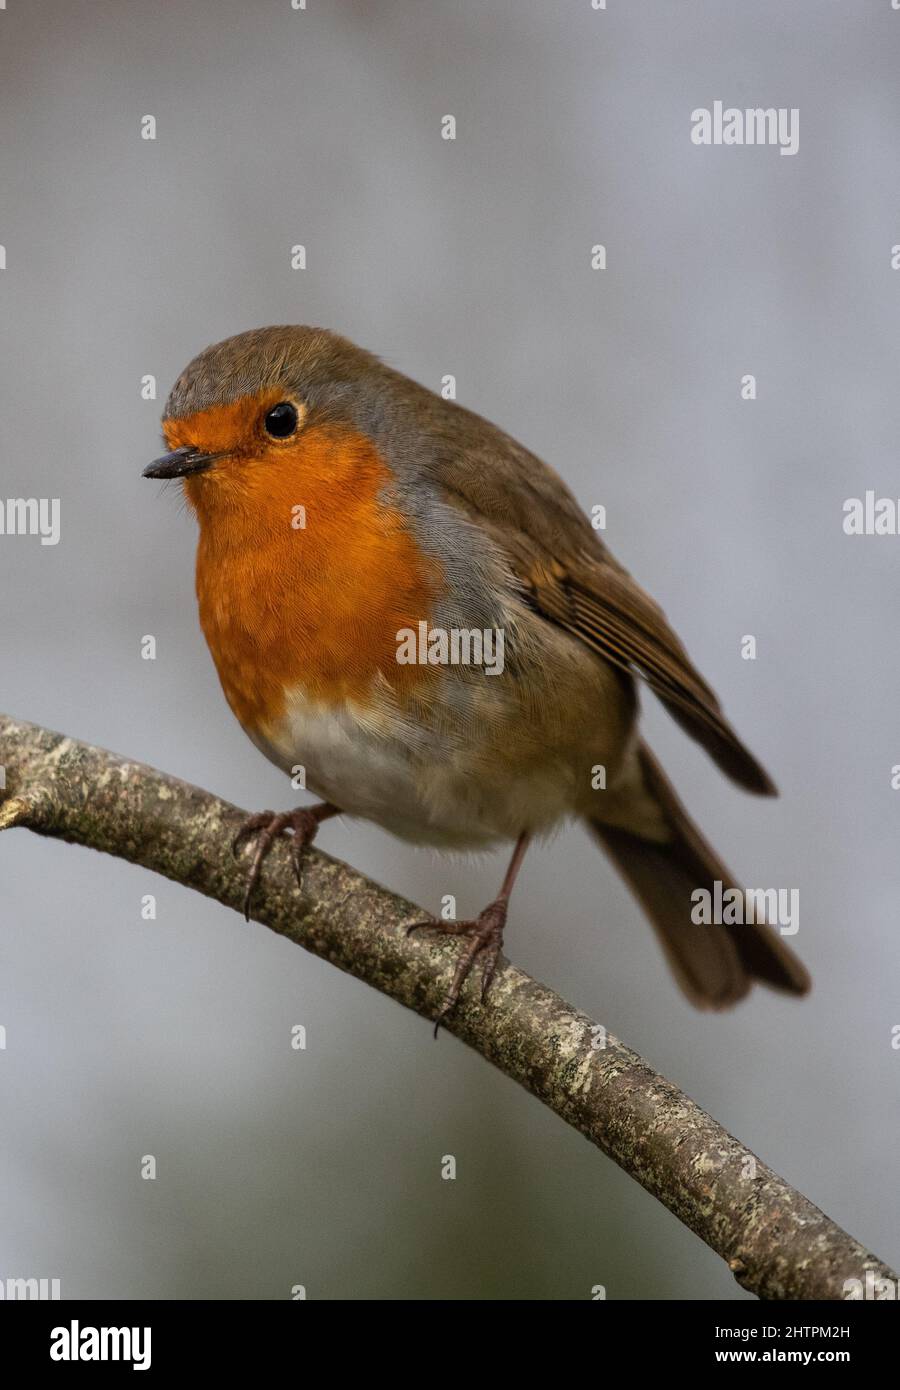 Close up Little robin bird perched on a tree twig Stock Photo